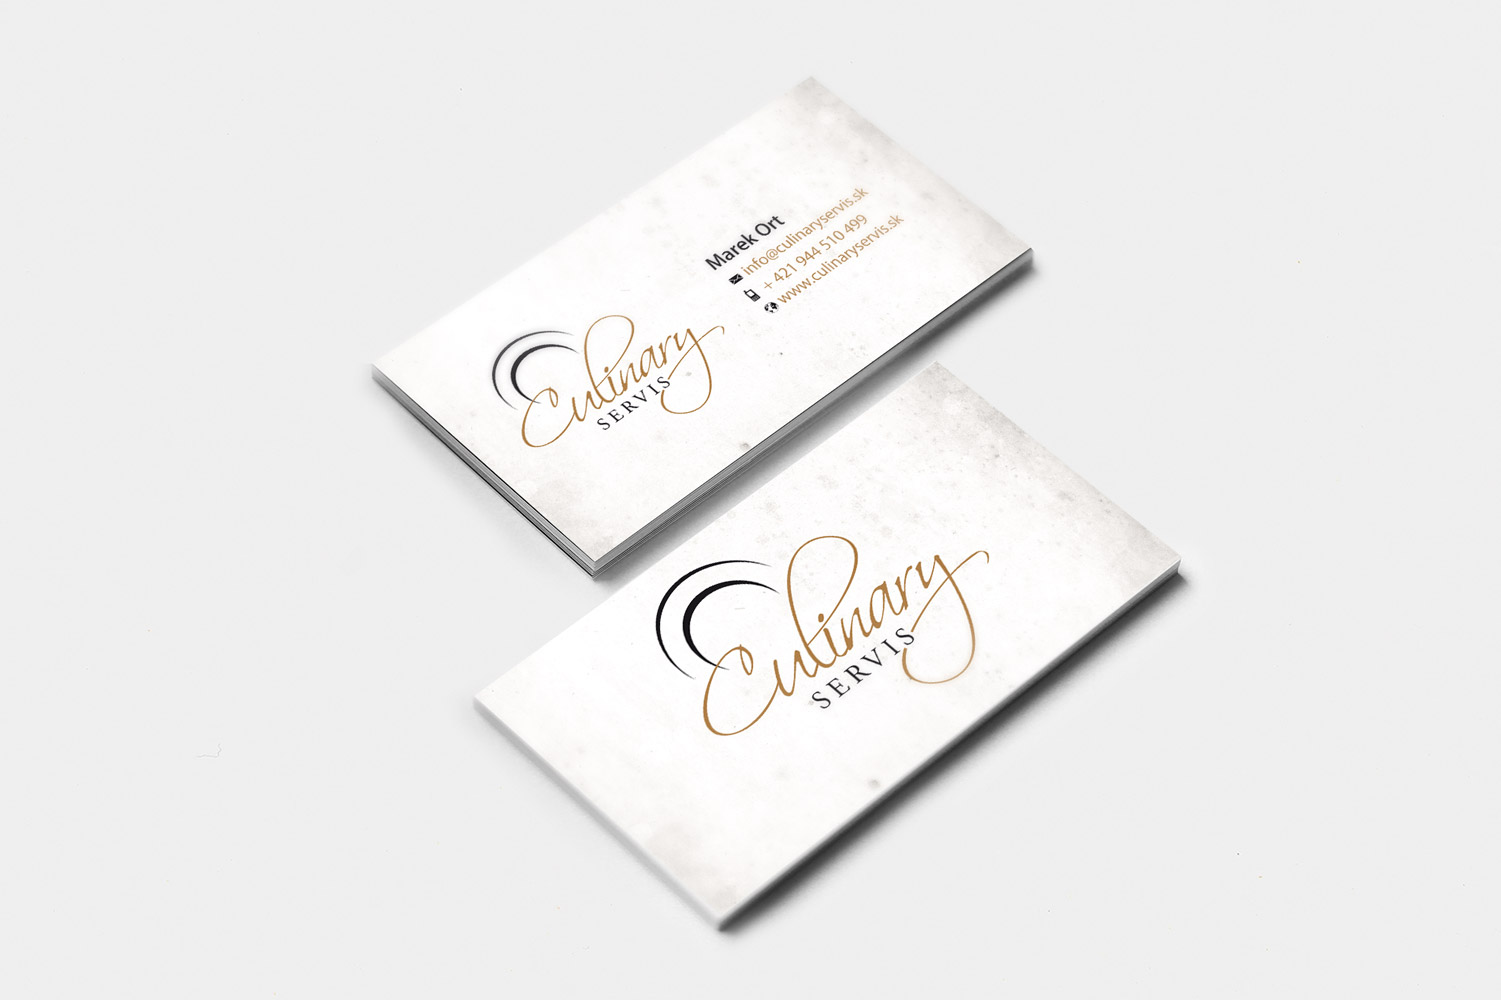 Culinary Servis, web design & business cards